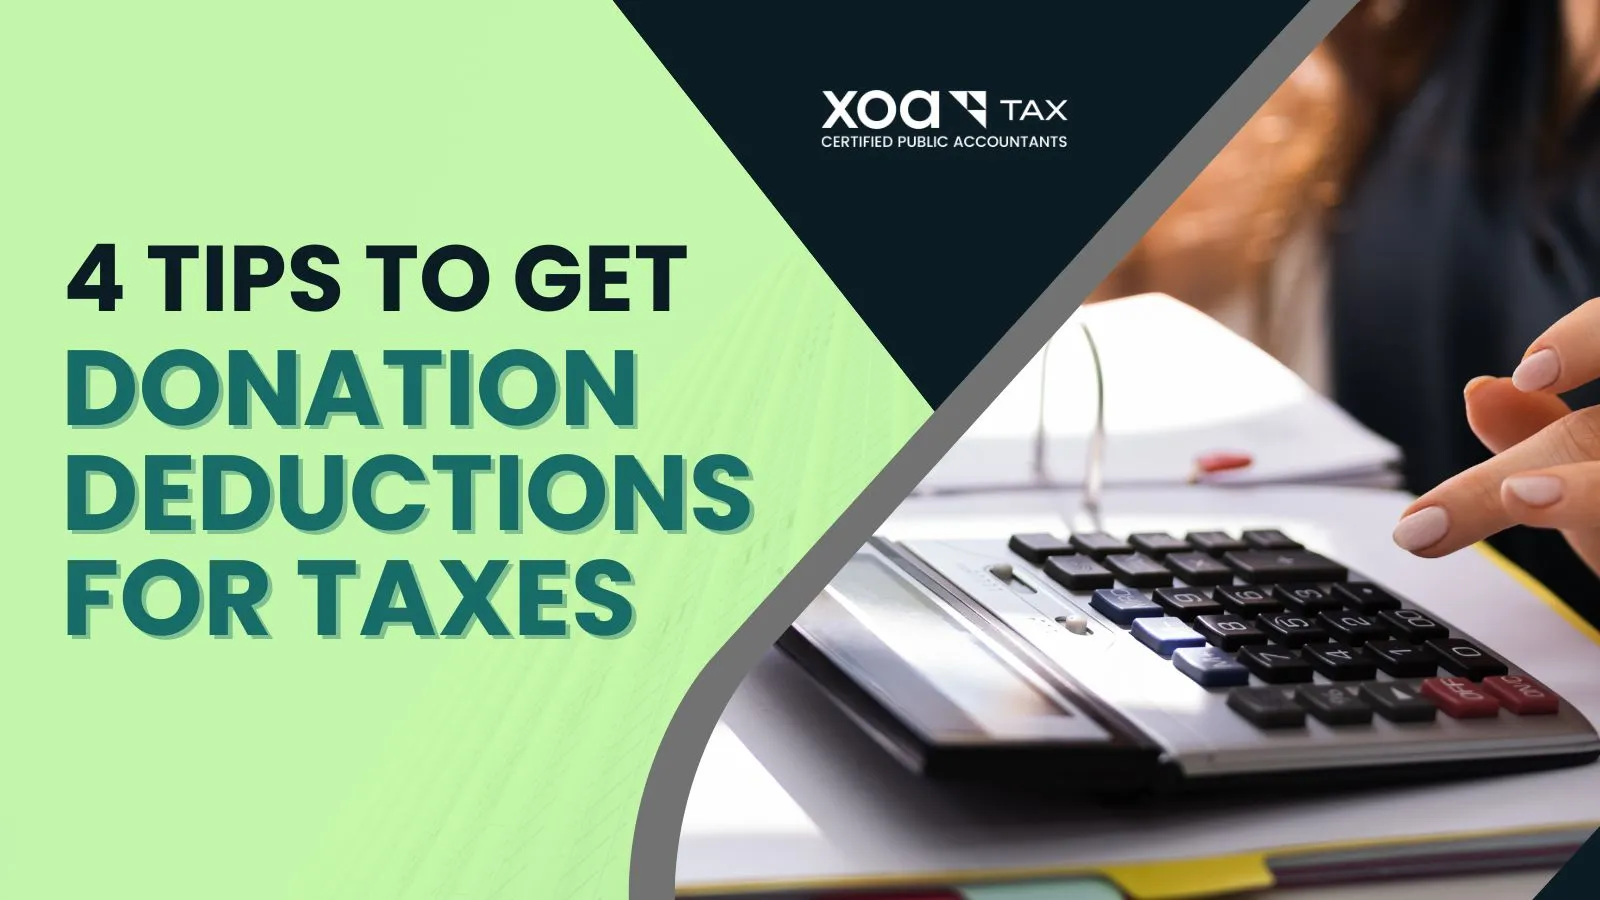 Donation deductions for taxes